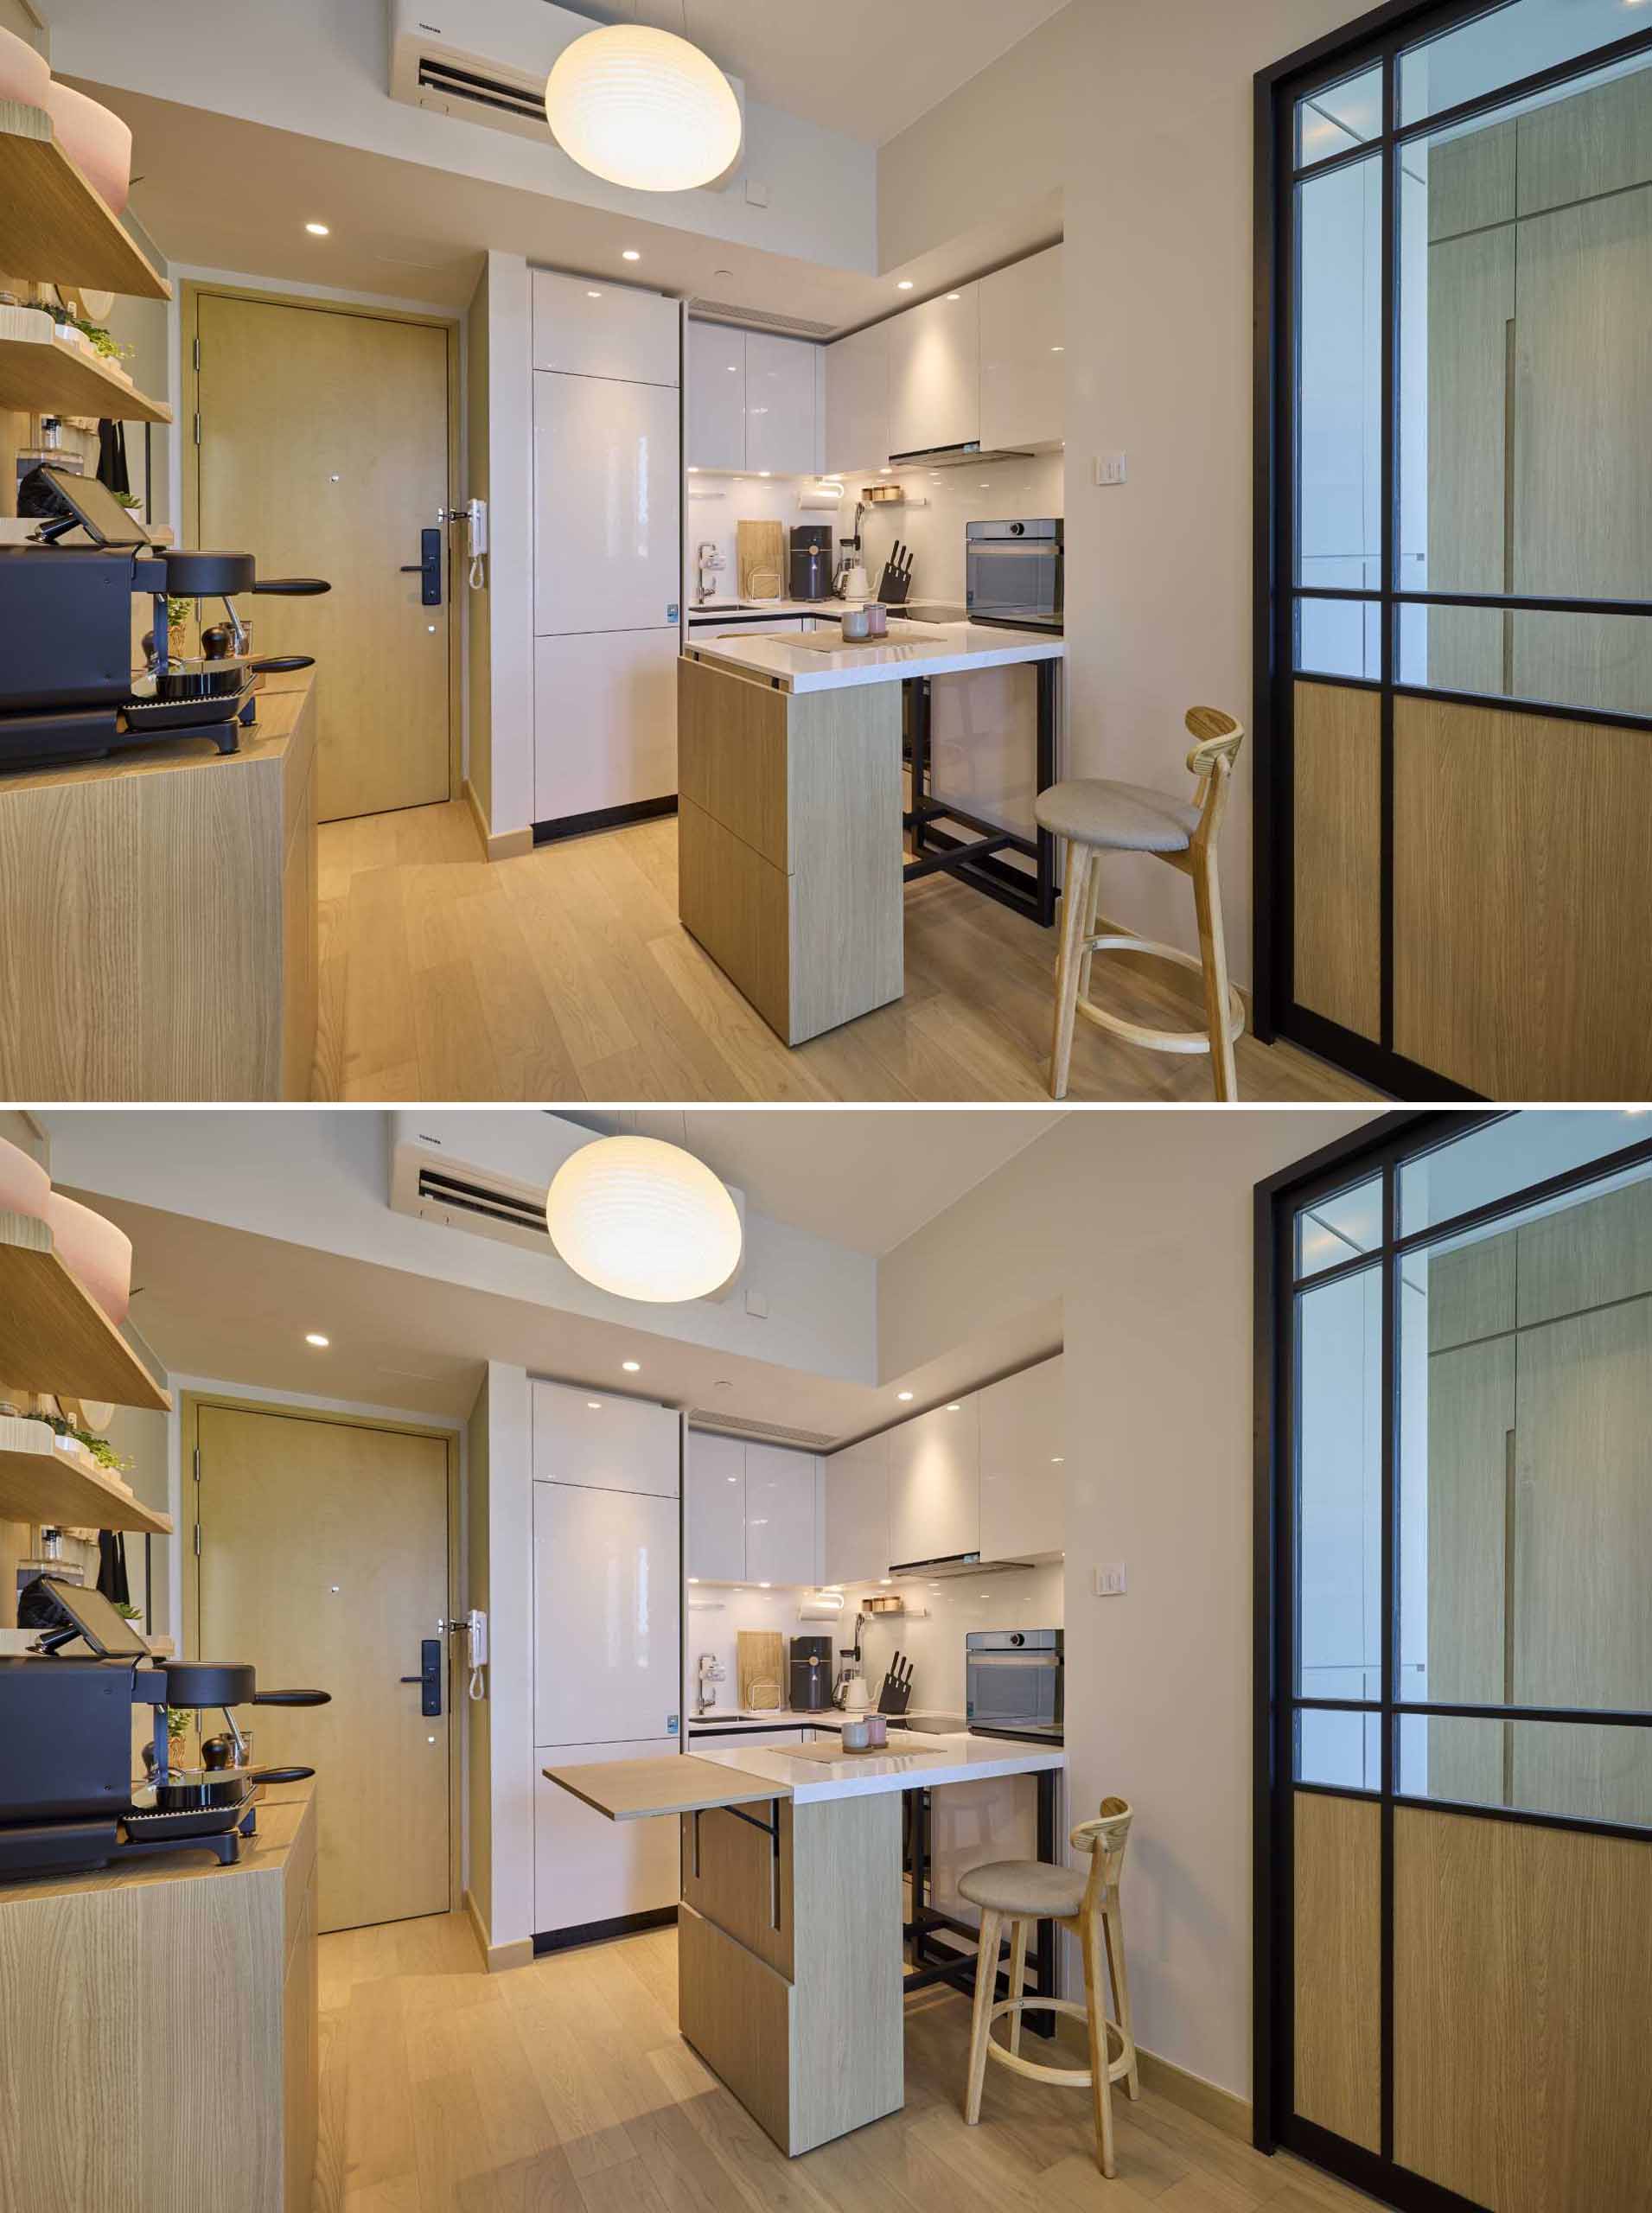 In this small apartment, a movable drop-leaf table of the same height as the cabinets acts as an extension of the countertop for food preparation